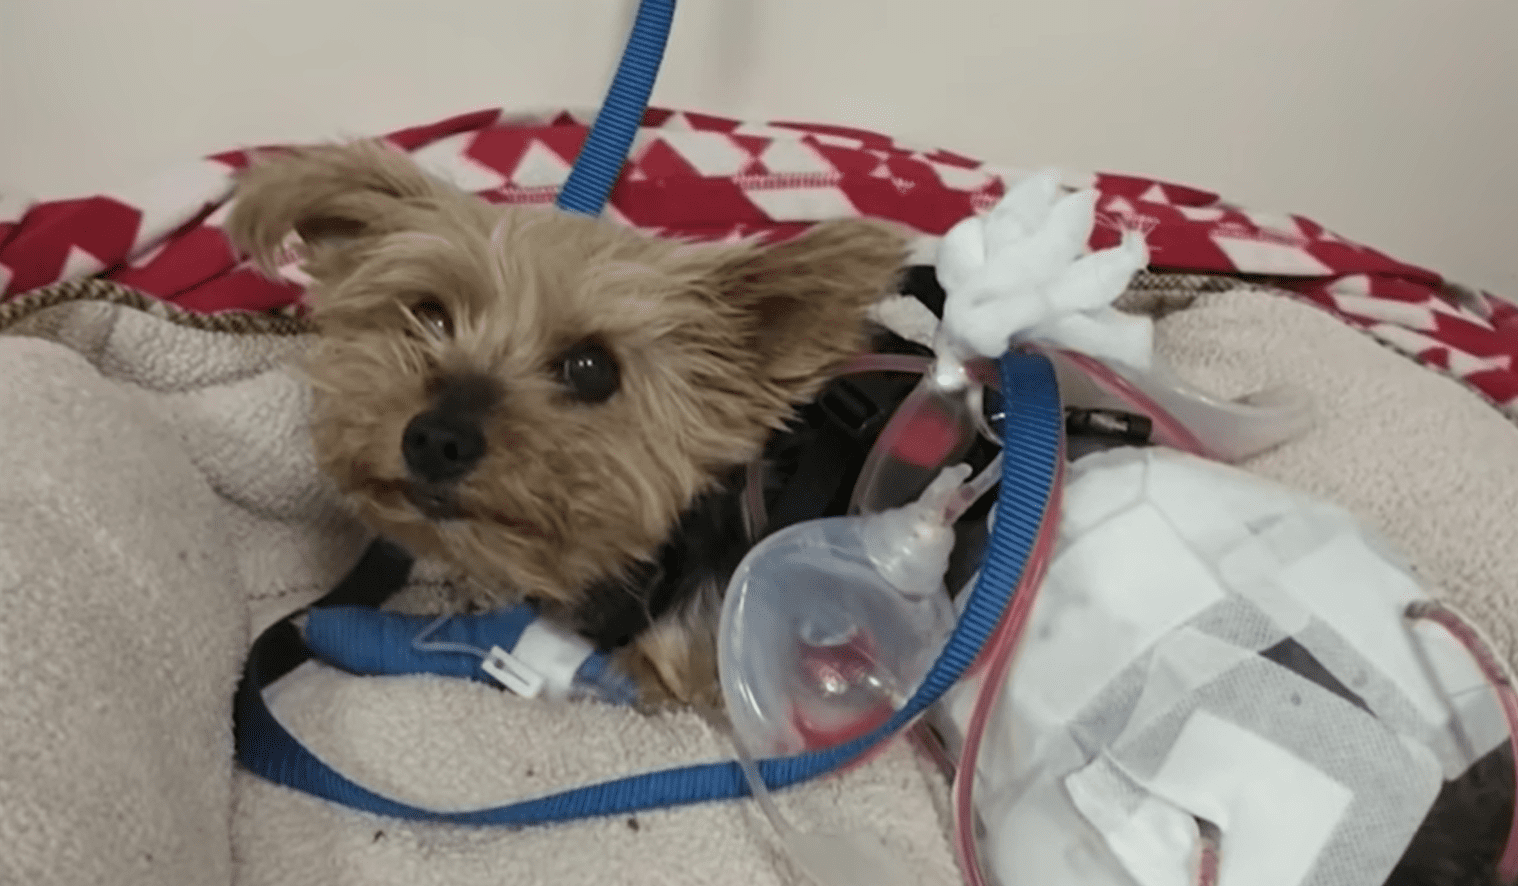 A 6-year-old Yorkie named Macy in intensive care. | Source: youtube.com/Your Morning